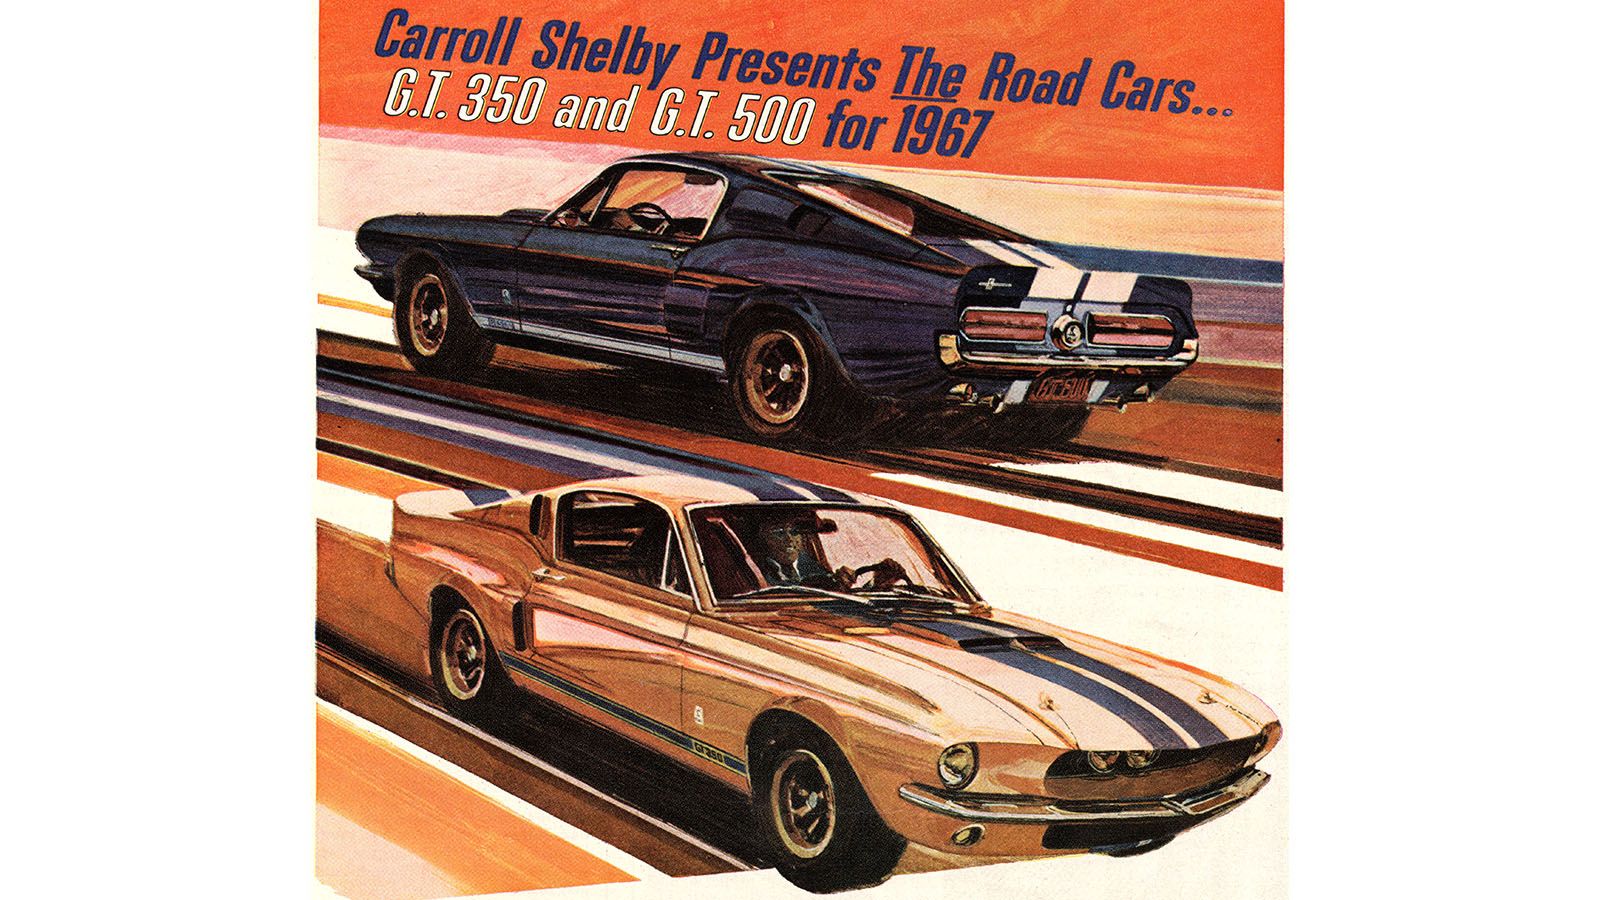 1967: Shelby Gt350 And Gt500 Are The Road Cars